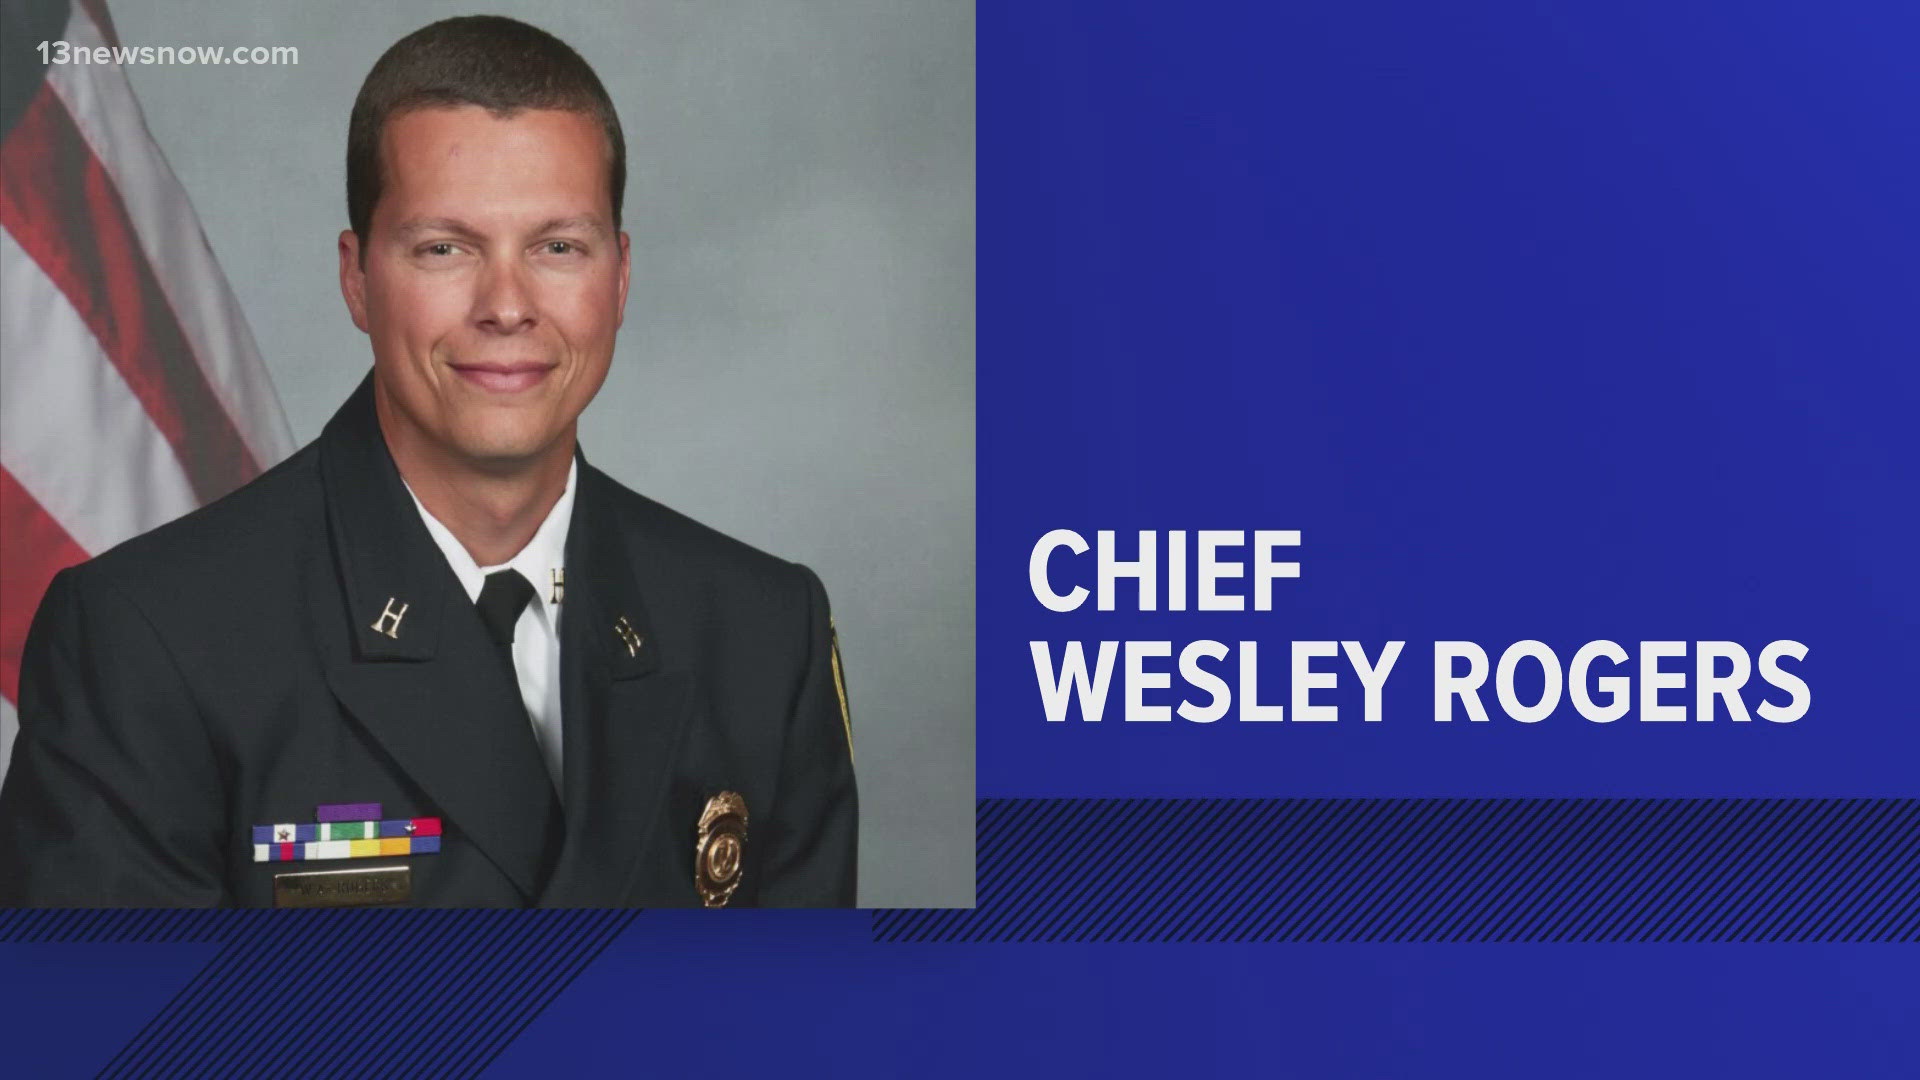 The Newport News city manager announced Wesley Rogers will take over as Fire Chief this week.